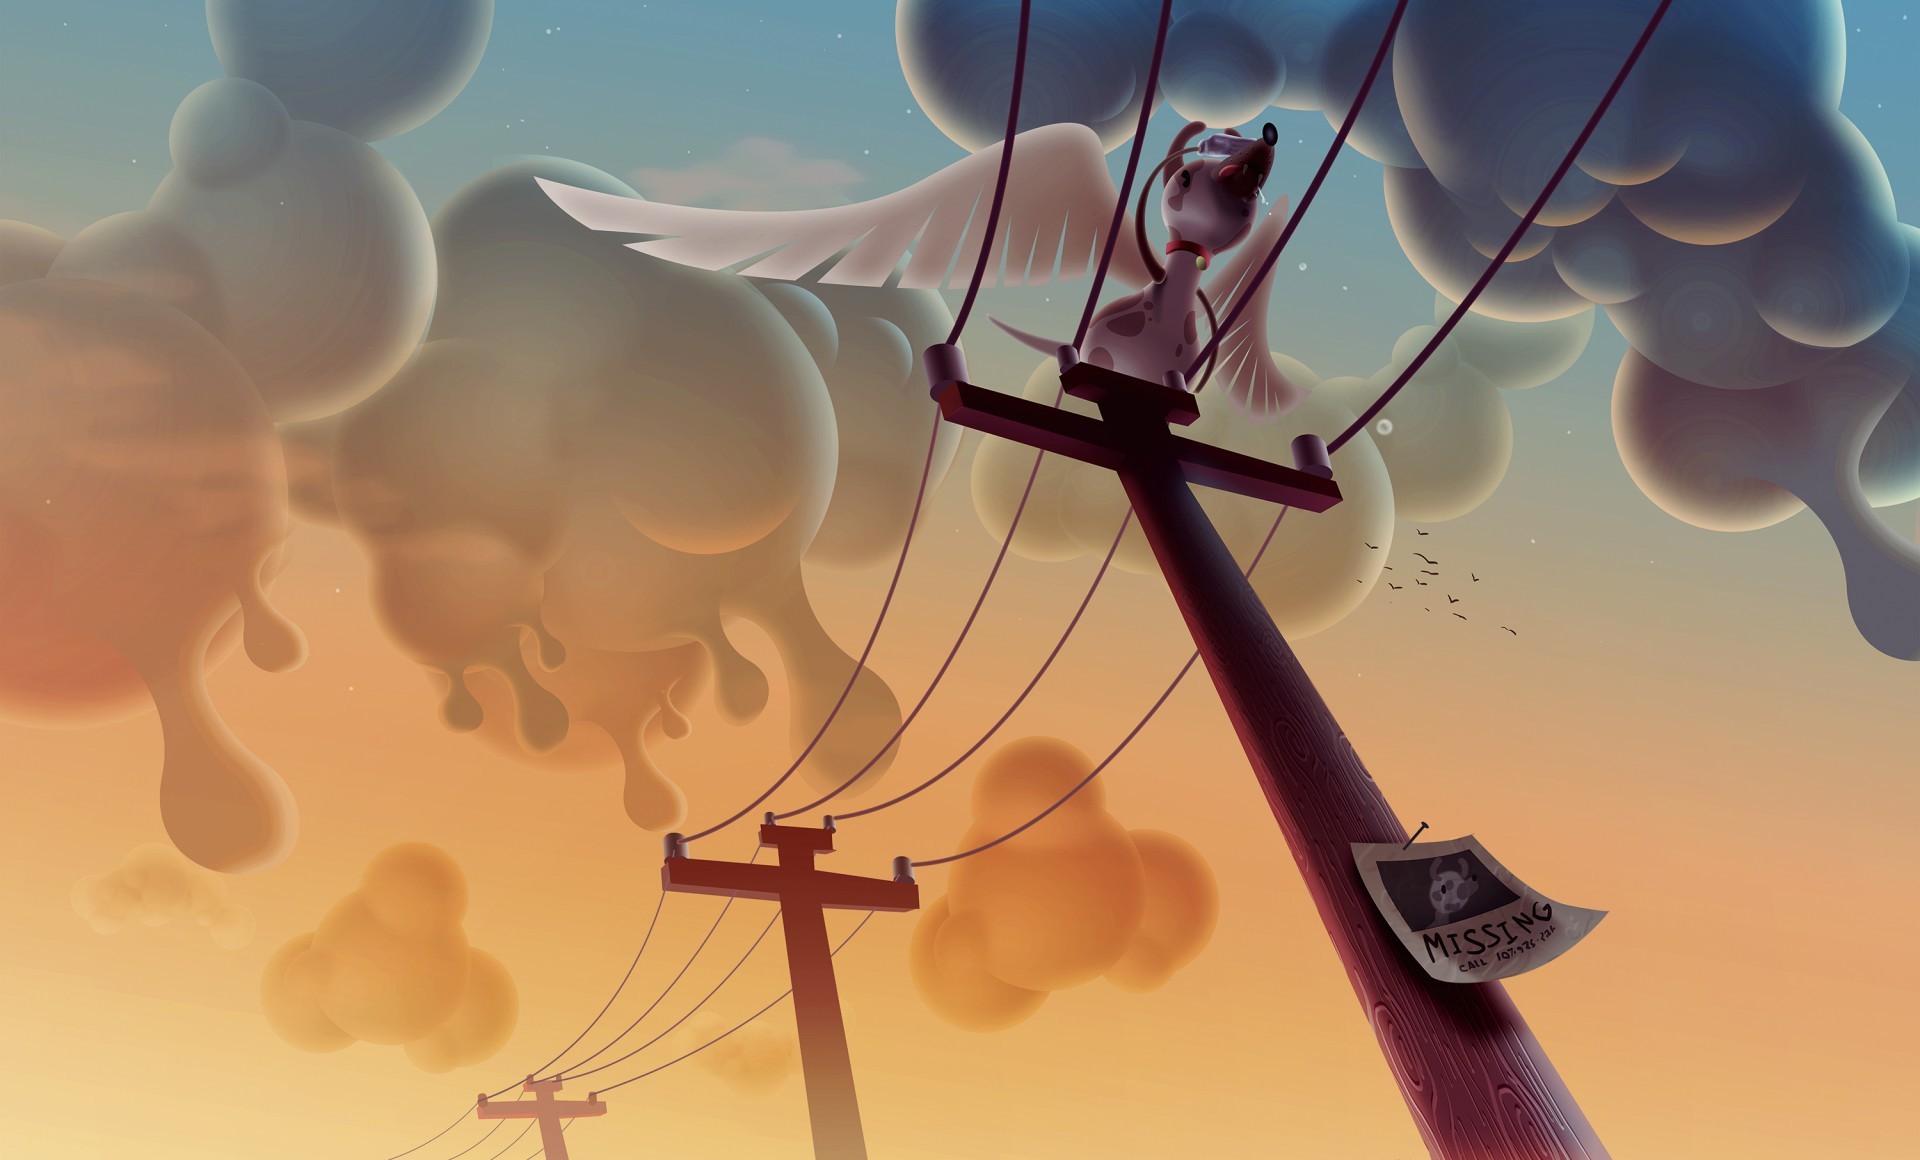 General 1920x1160 digital art Aaron Campbell animals utility pole dog clouds wings humor